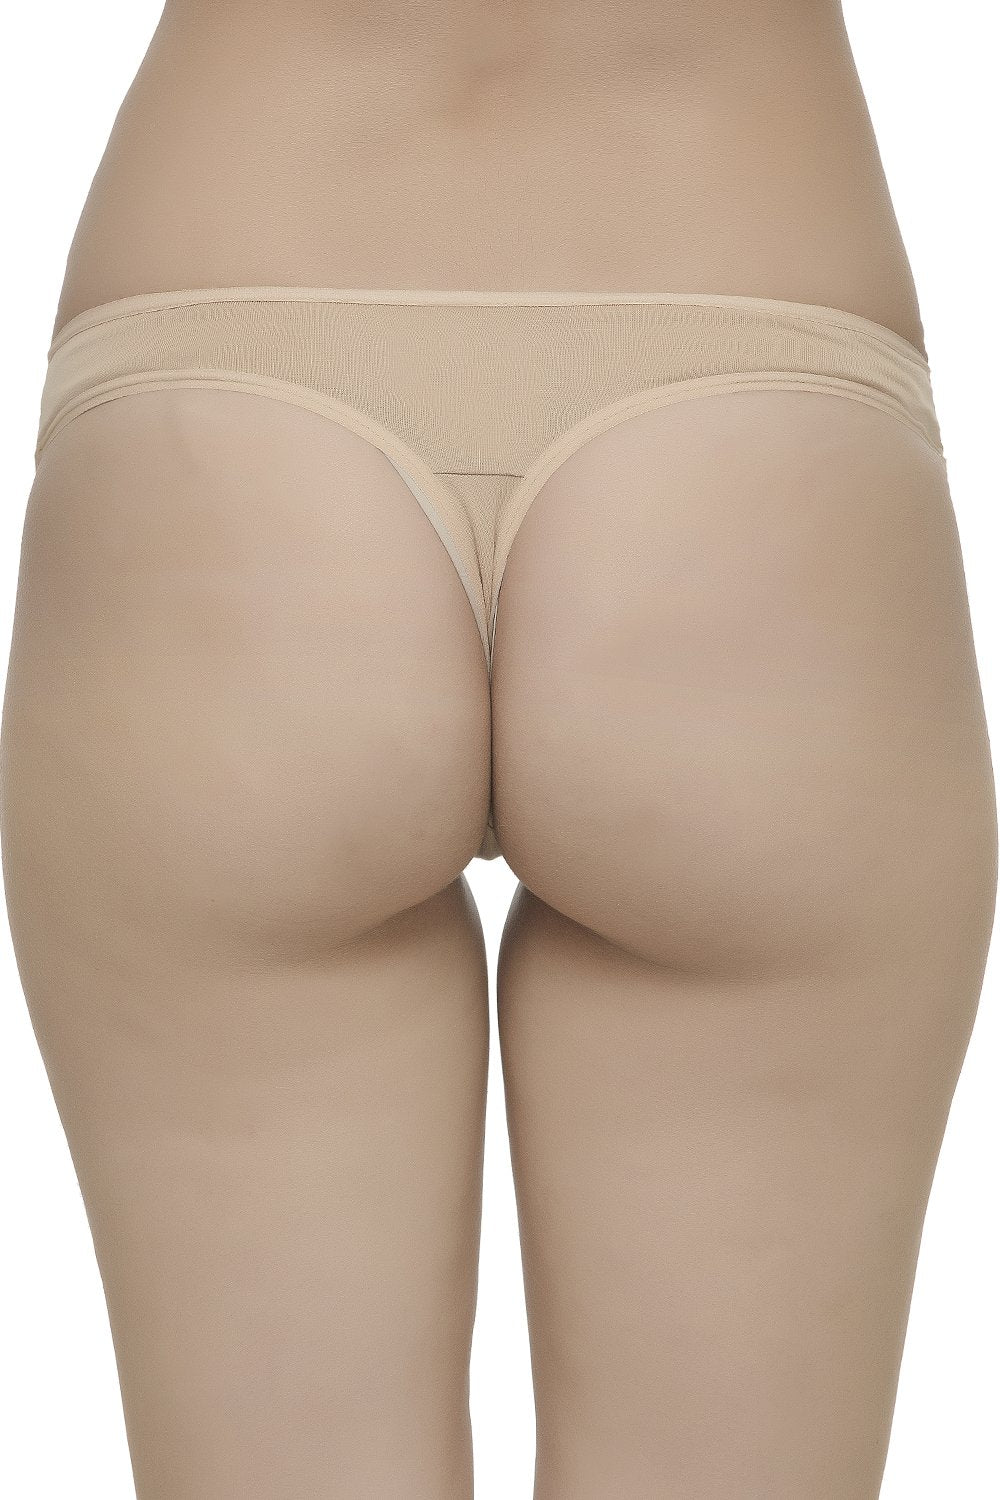 Inner Sense Organic Cotton Antimicrobial Thong ( Pack of 2 ) Cotton, featured, full back coverage, organic, Panties - bare essentials